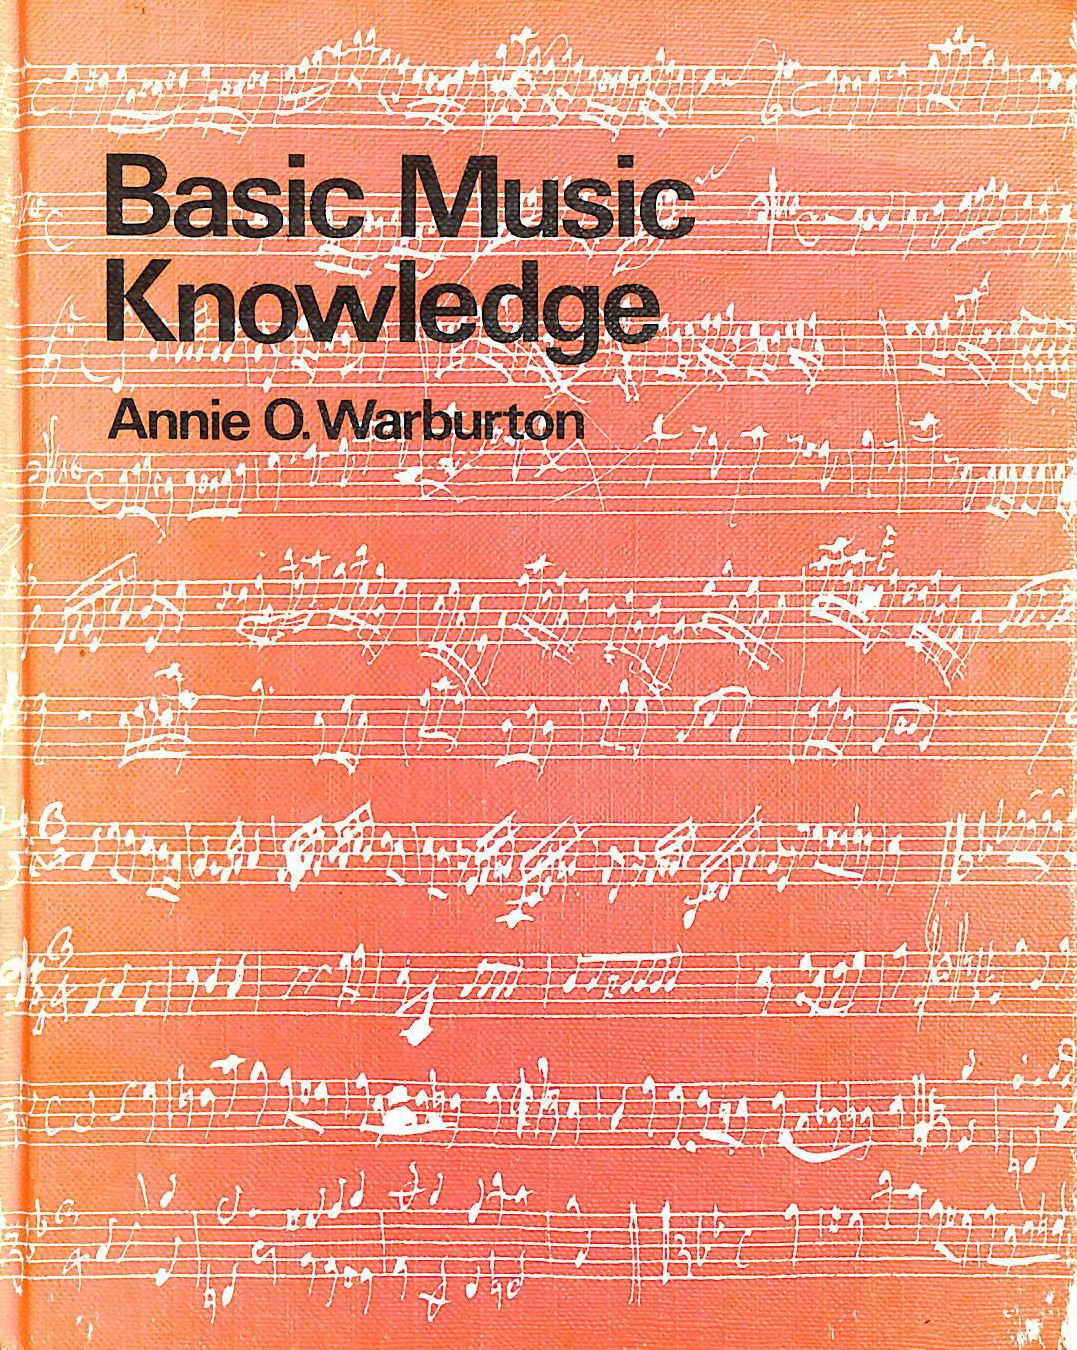 ANNIE O WARBURTON - Basic Music Knowledge: a Text Book Which Can Be Flexible Adapted to Meet the Requirements of Various Examinations